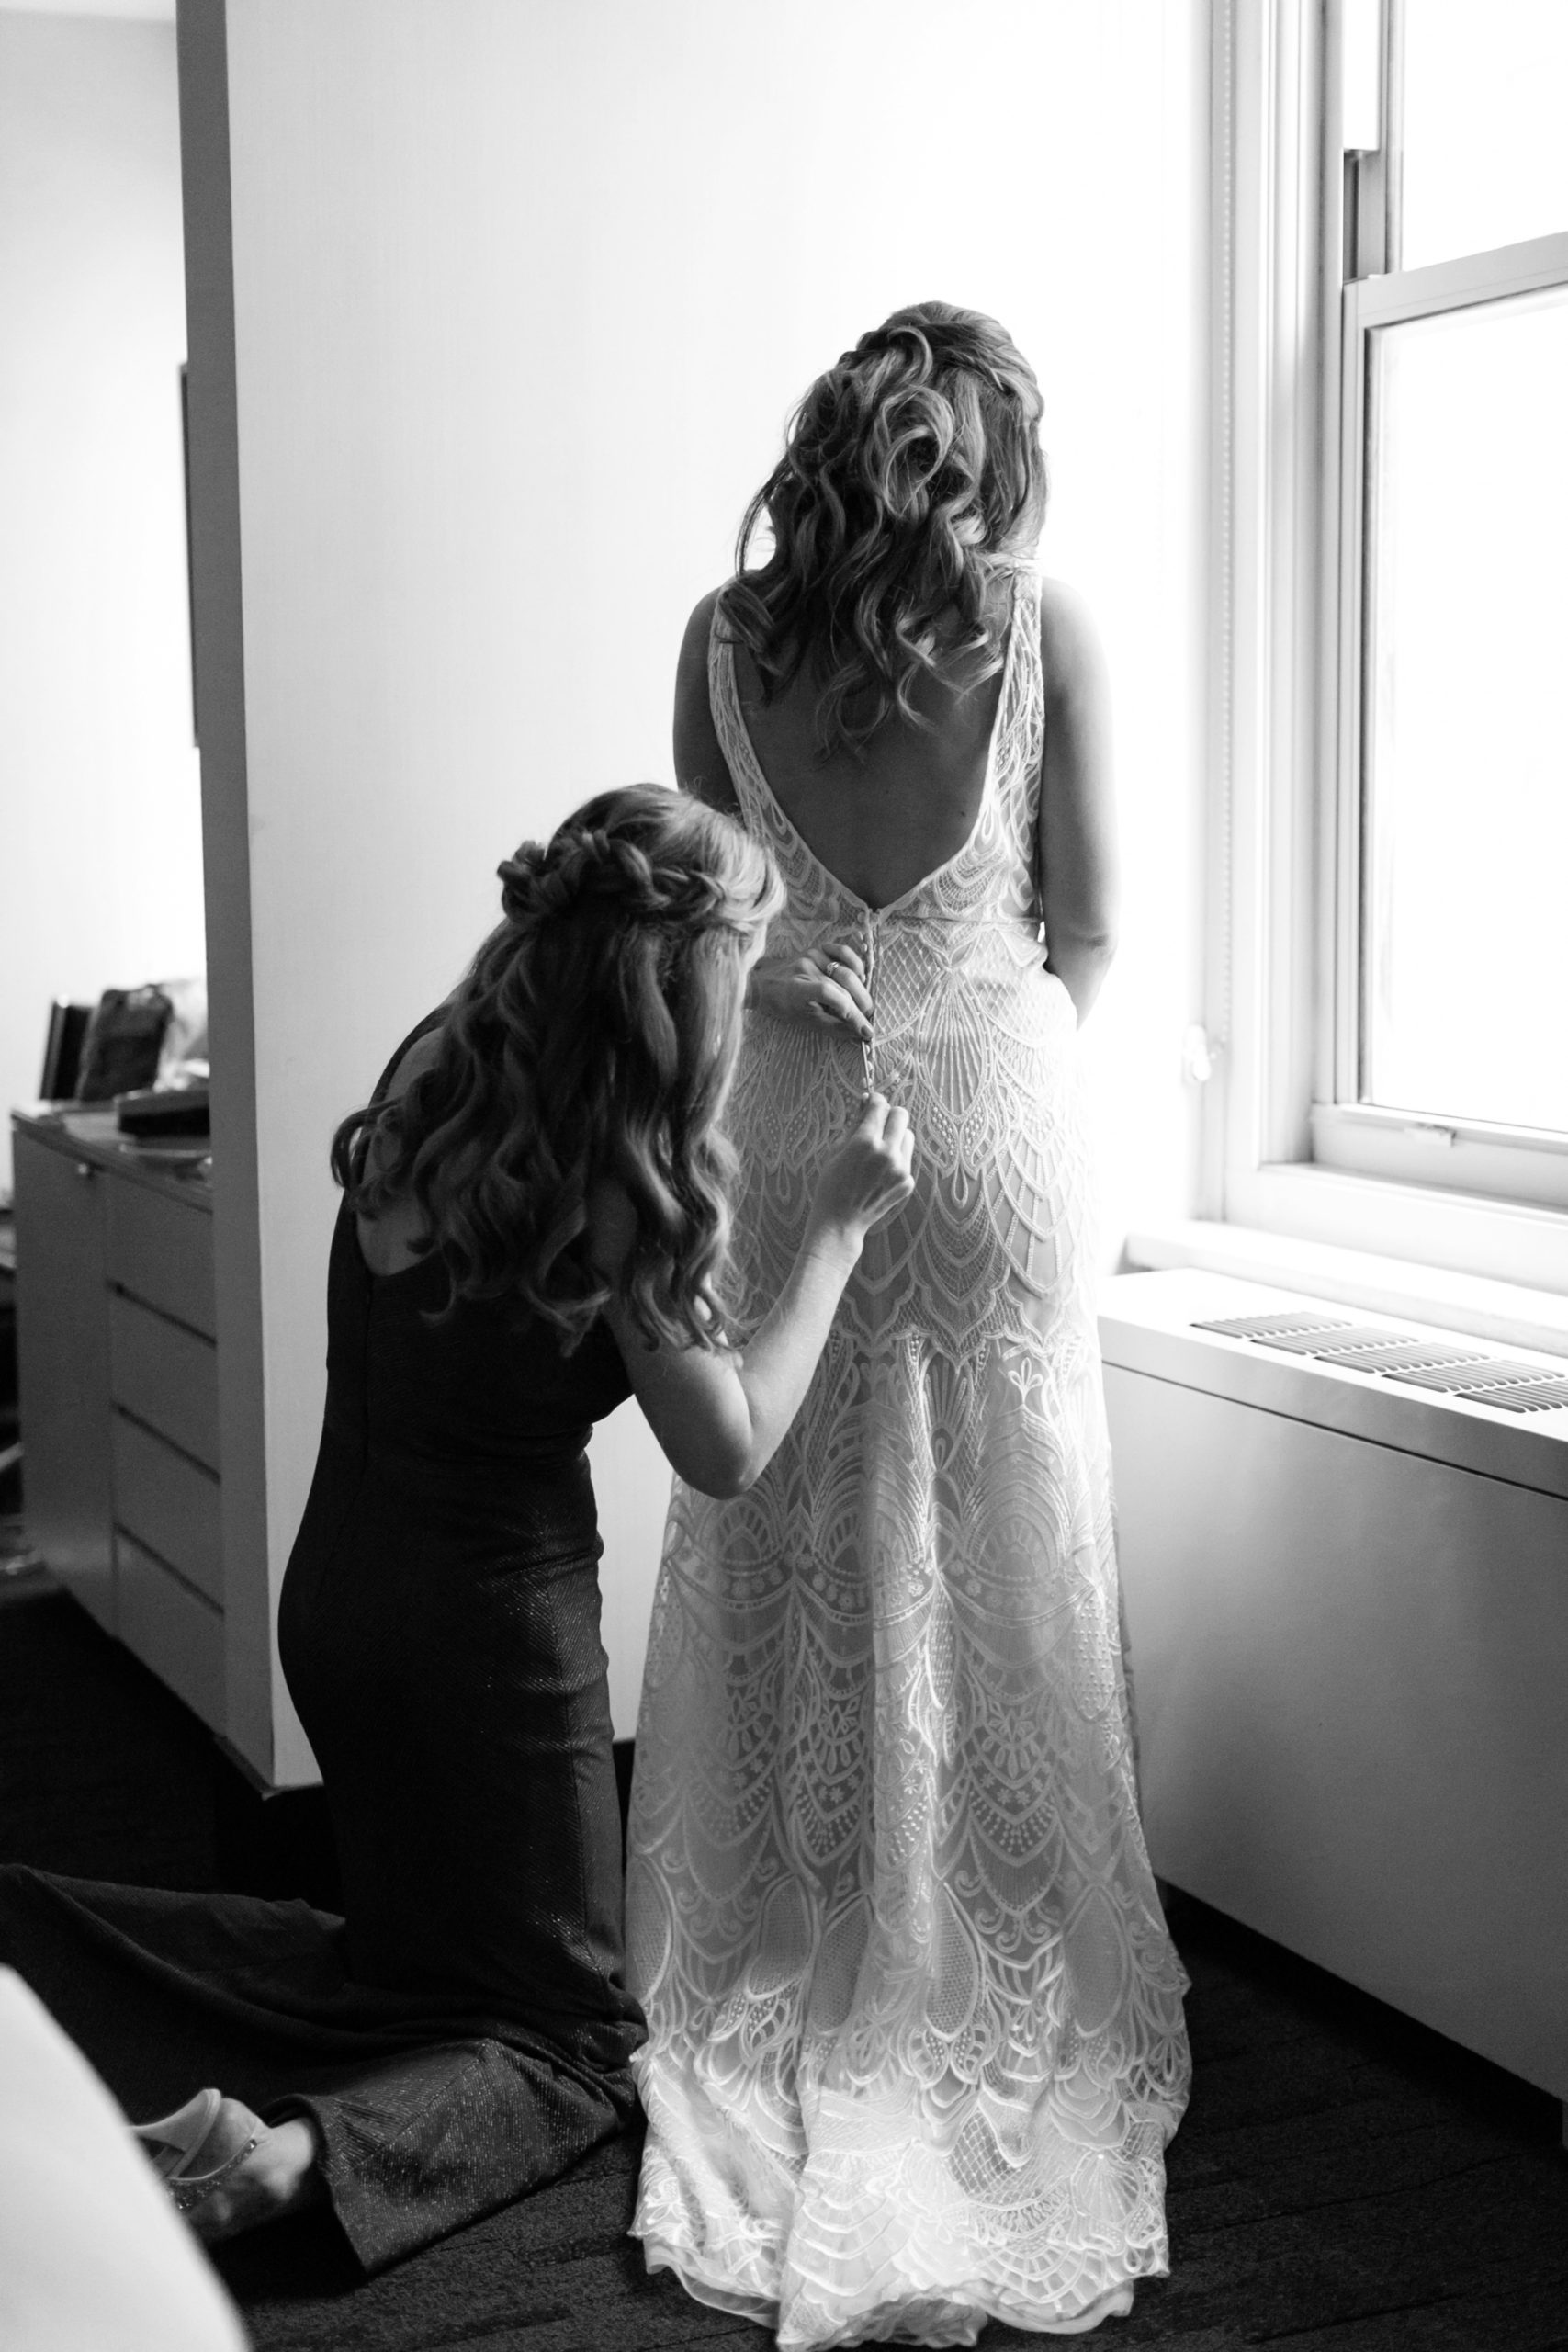 the bride got into her wedding dress with help from her maid of honor